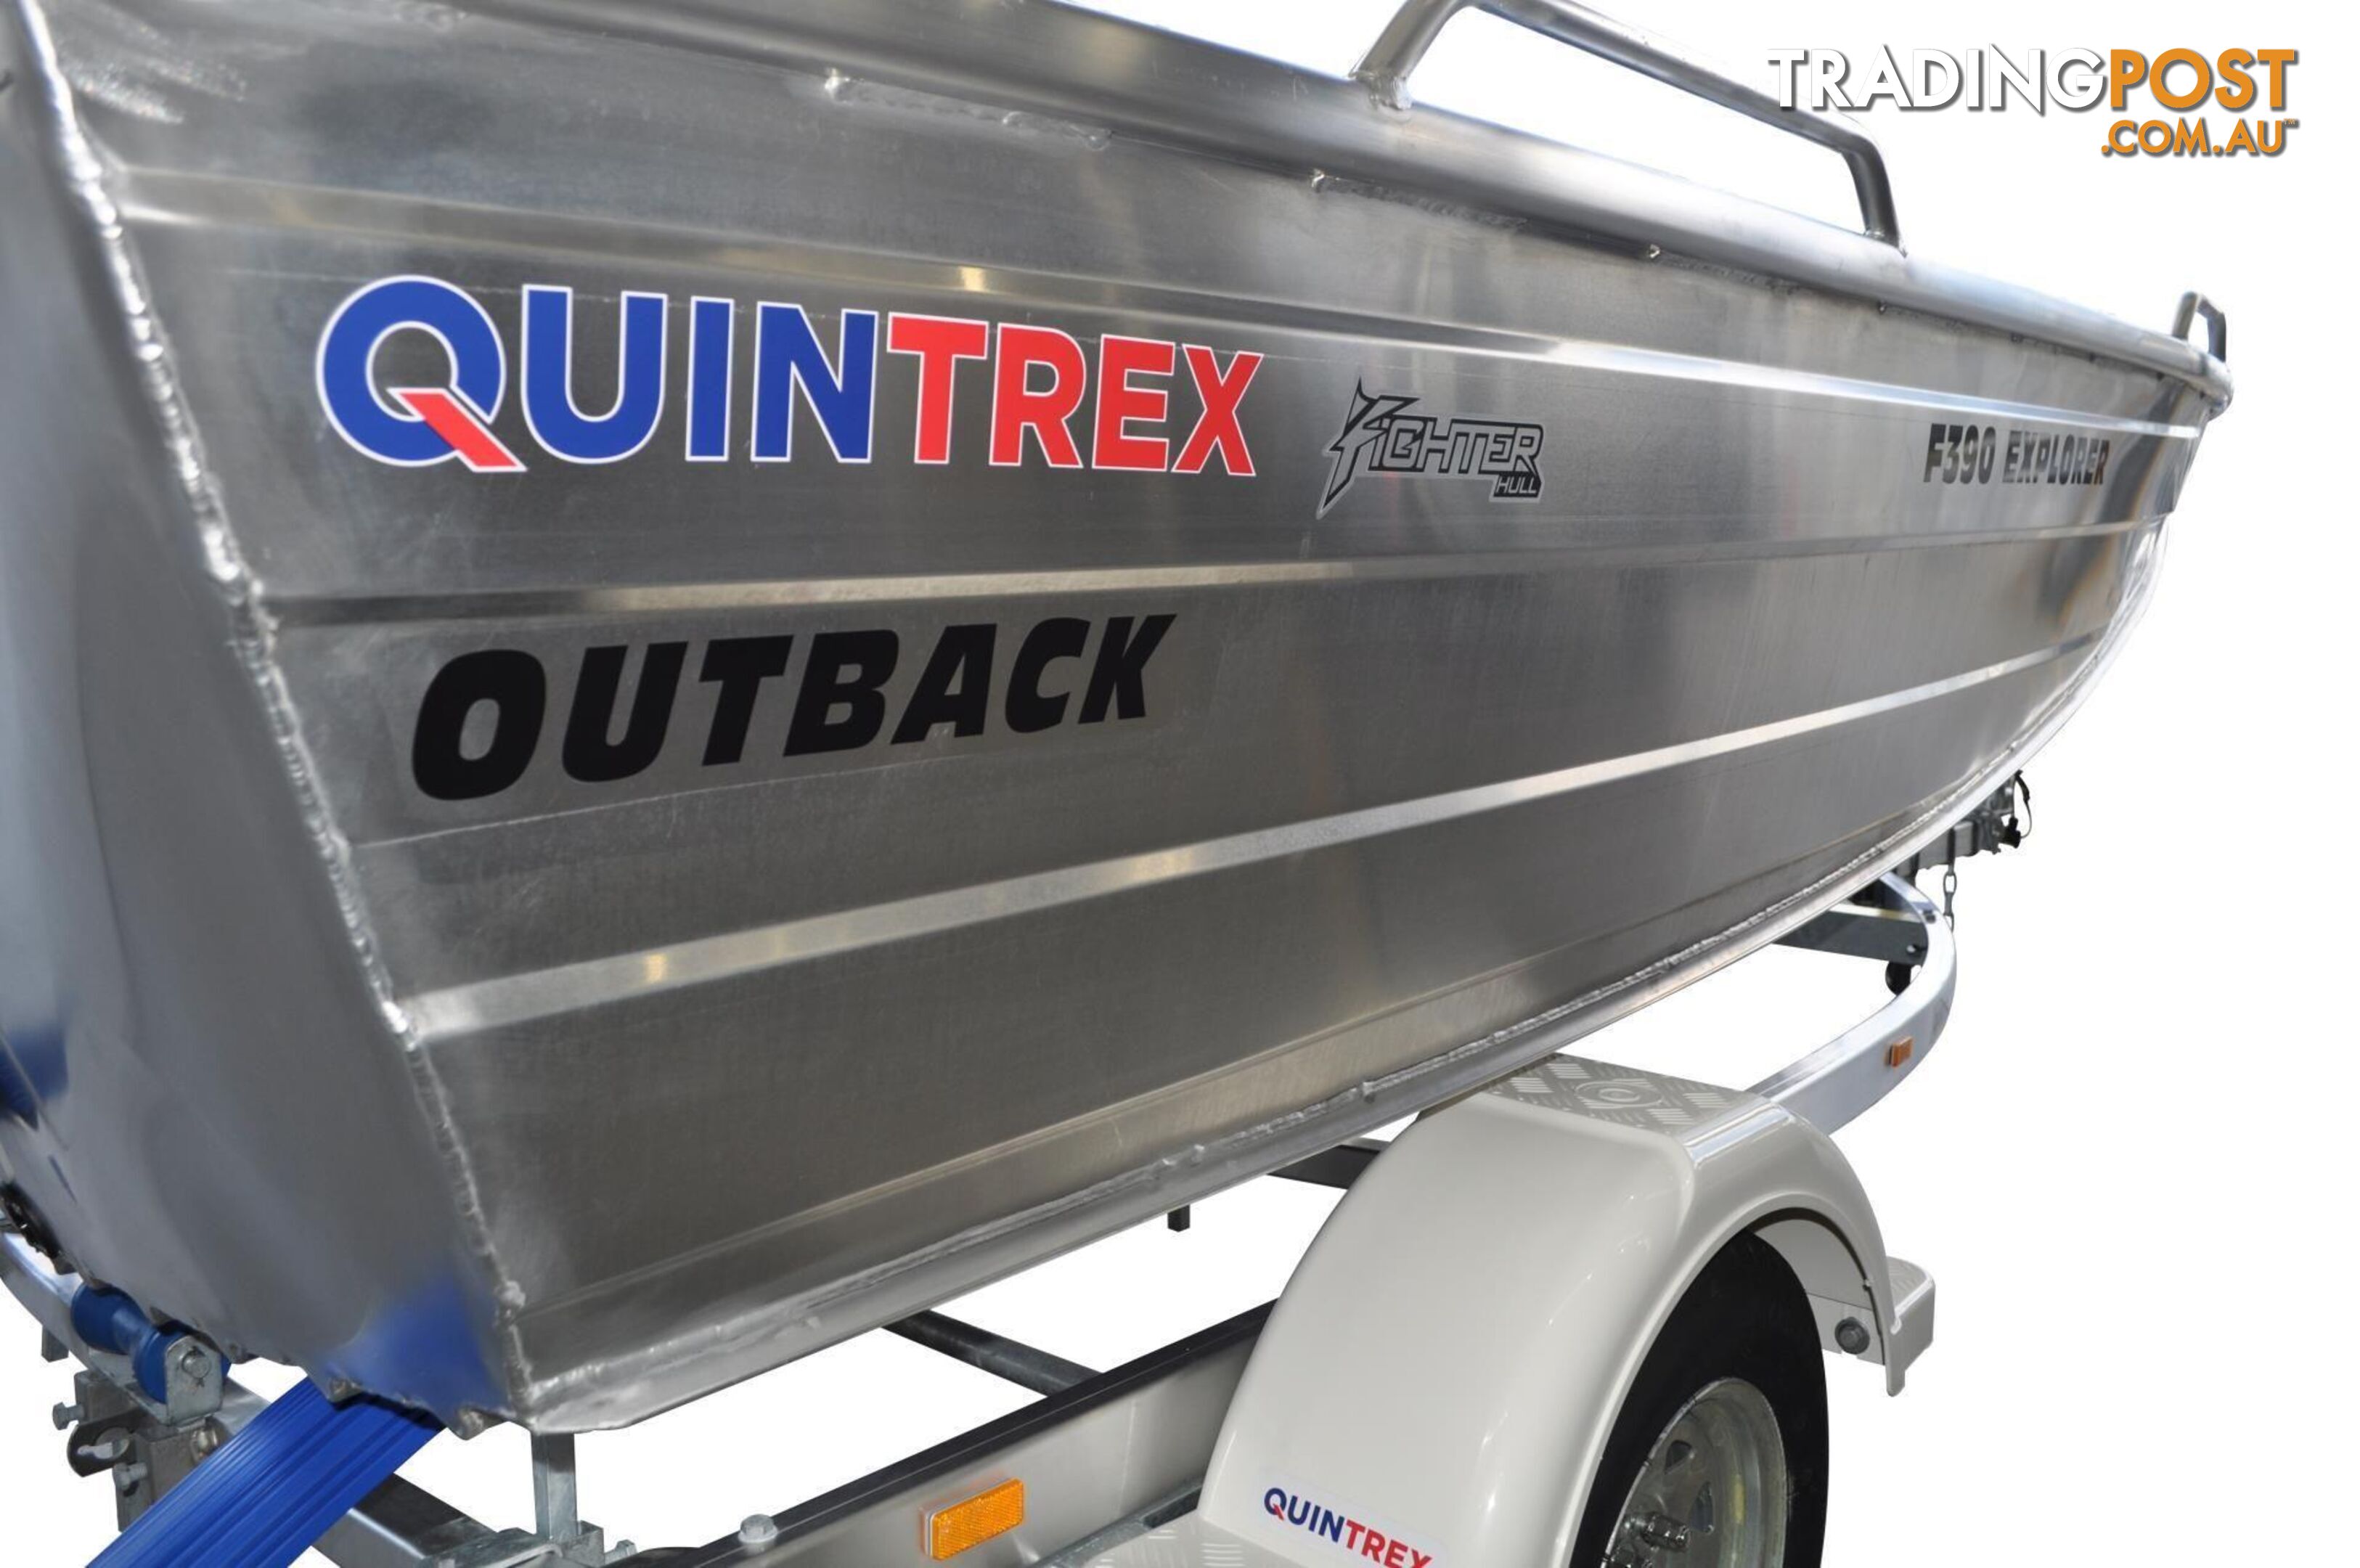 Quintrex F390 Outback Explorer package